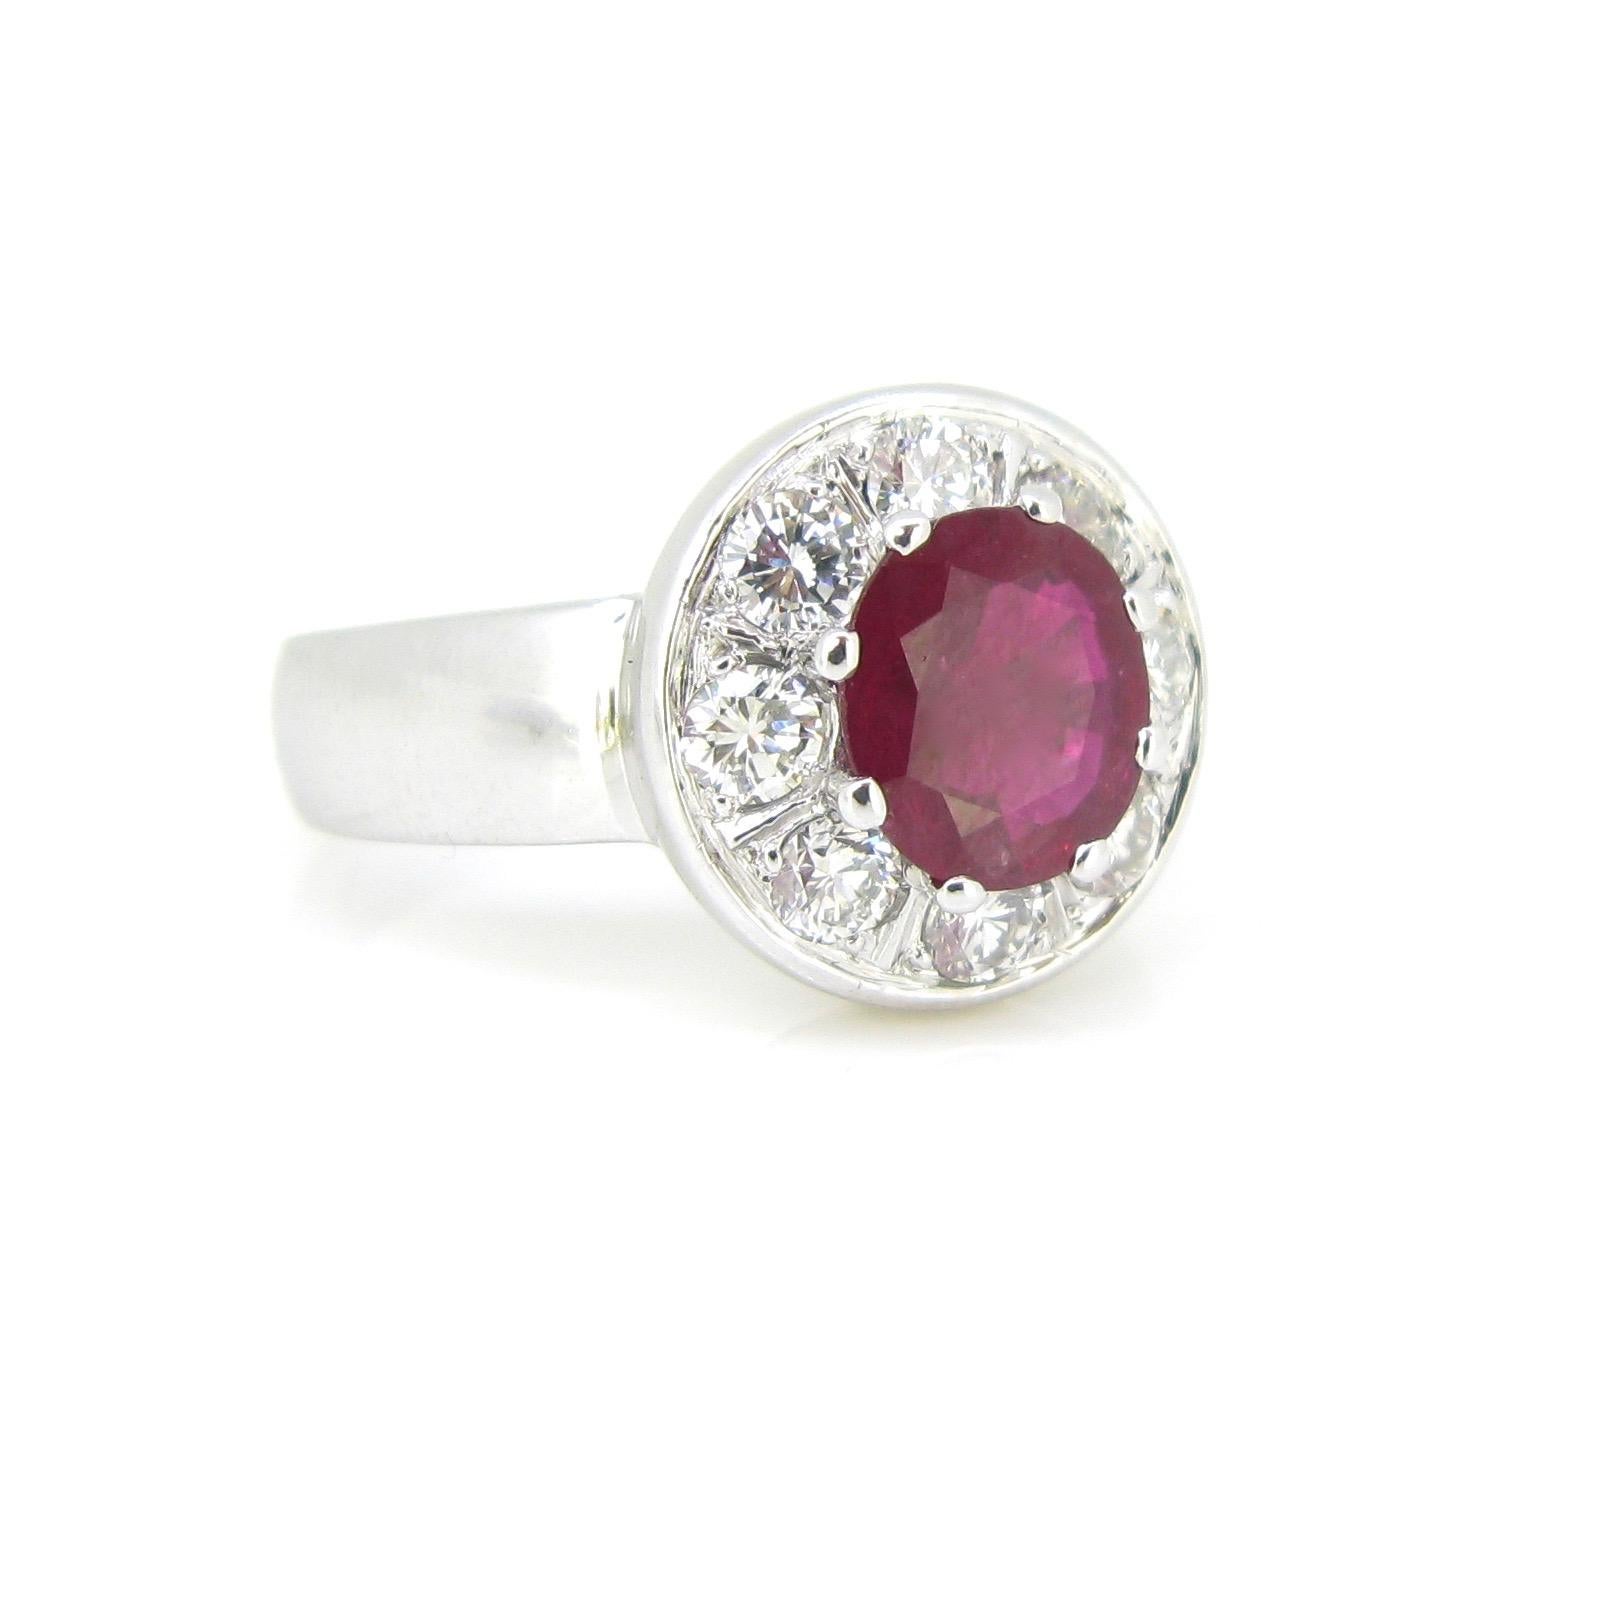 This ring is set with a natural Thaï Ruby weighing 1,83ct. It is surrounded with 8 brilliant cut diamonds. There is an approximate total carat weight of 1,20ct. The diamonds have a good color (H) and a good clarity (VS). The mount is bold and shiny.